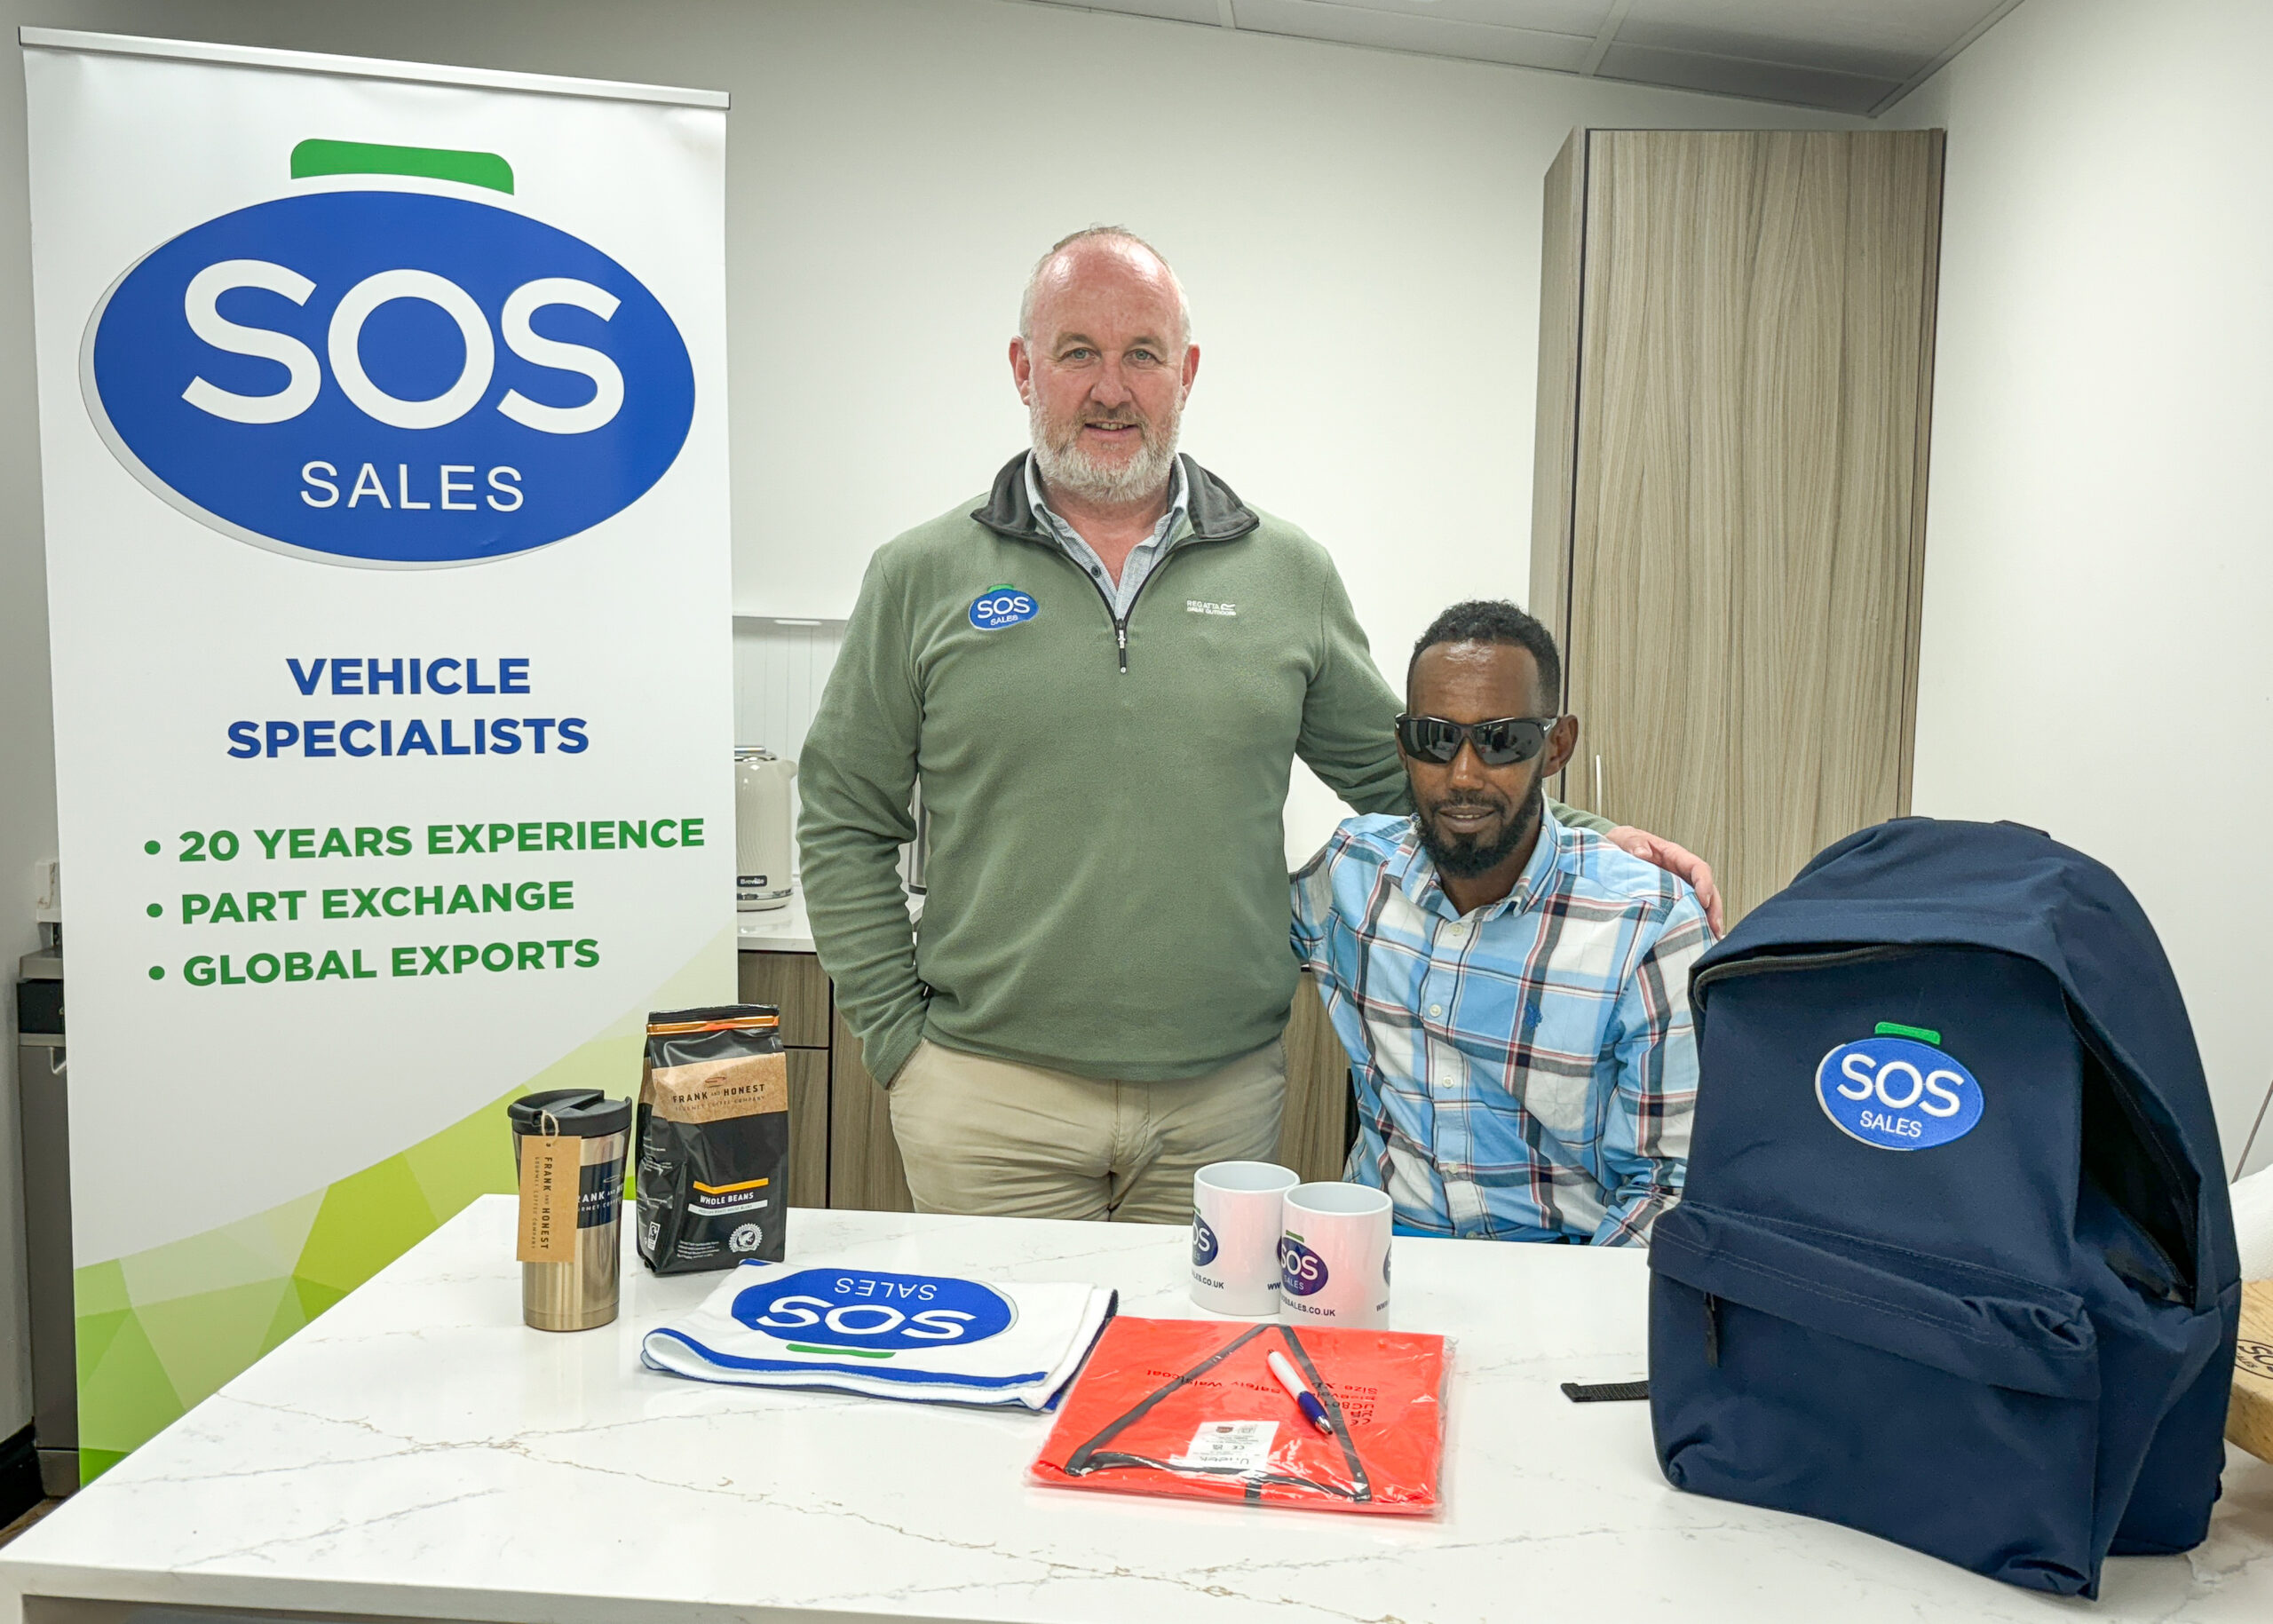 From Somalia to Armagh – Abdul’s Journey with SOS Sales Ltd.